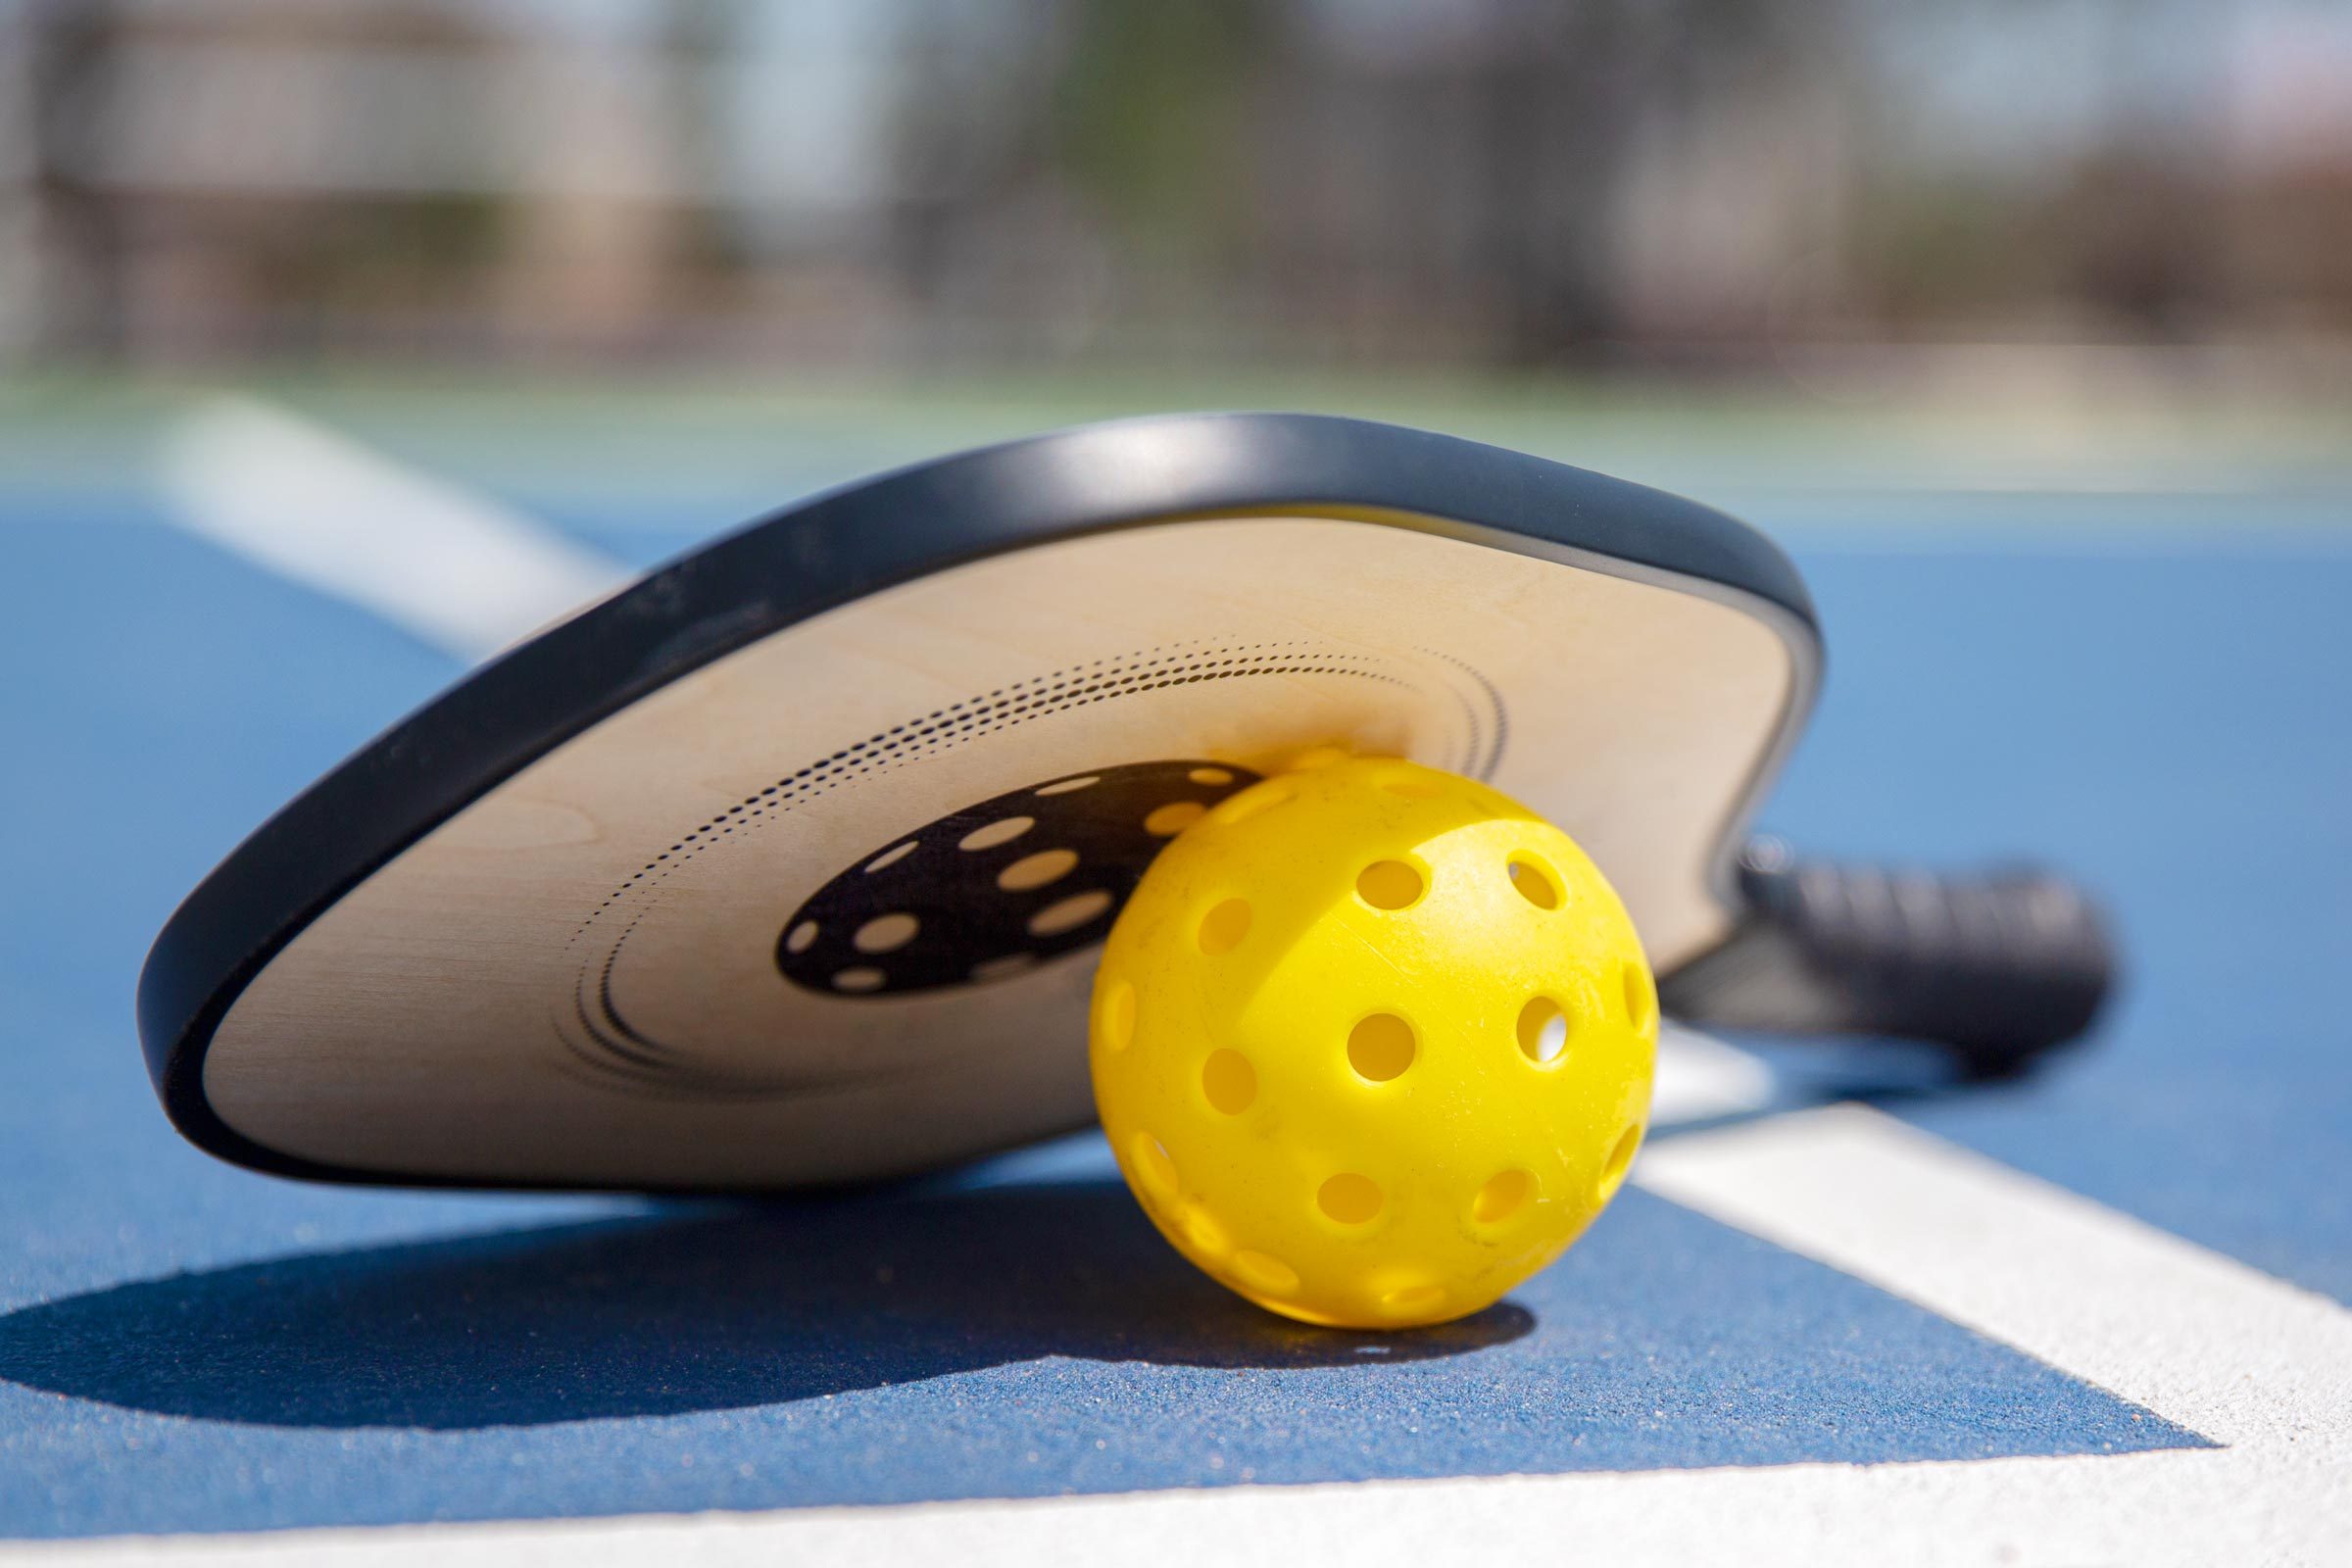 These Are the Top 5 Pickleball Injuries, Says an Orthopedic Surgeon